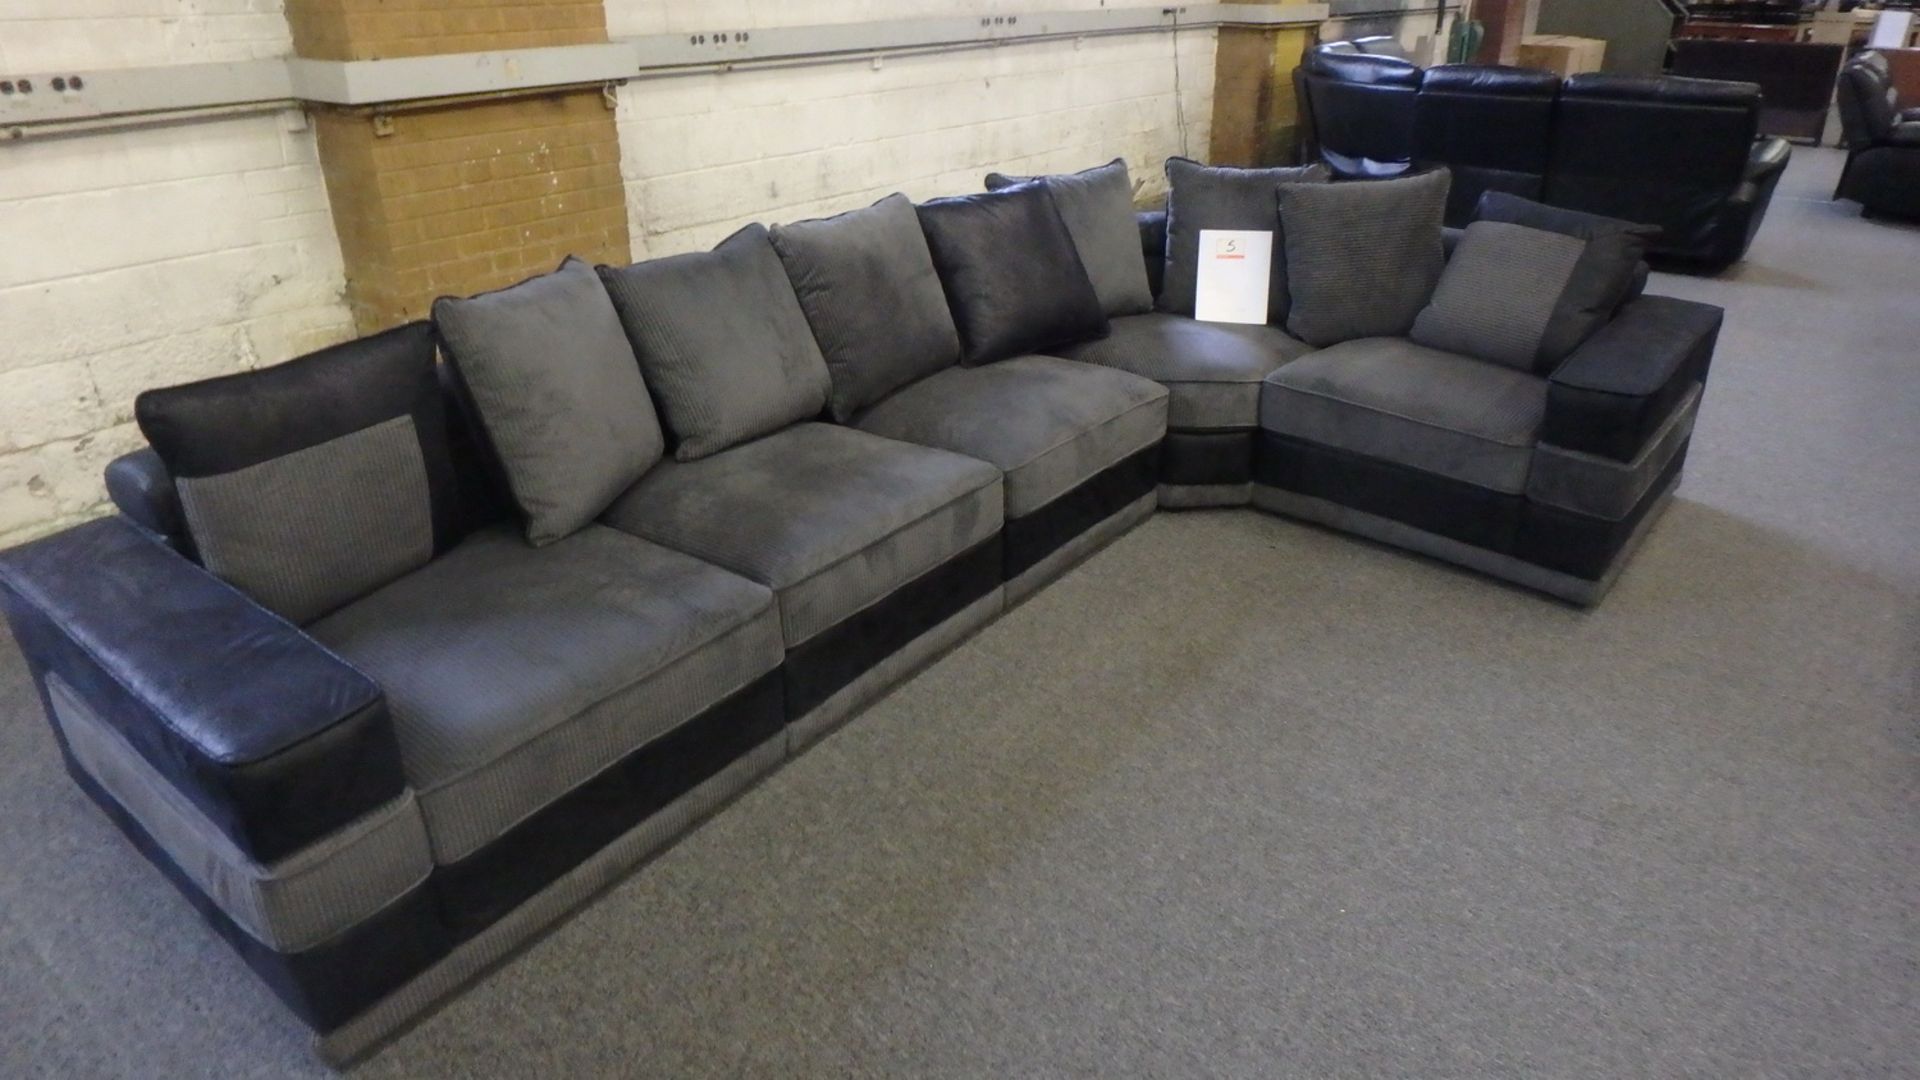 LOT - GREY & BLACK UPHOLSTERED MODULAR L-SHAPED SECTIONAL SOFA C/W THROW PILLOWS (LK-L7220) (NEW)